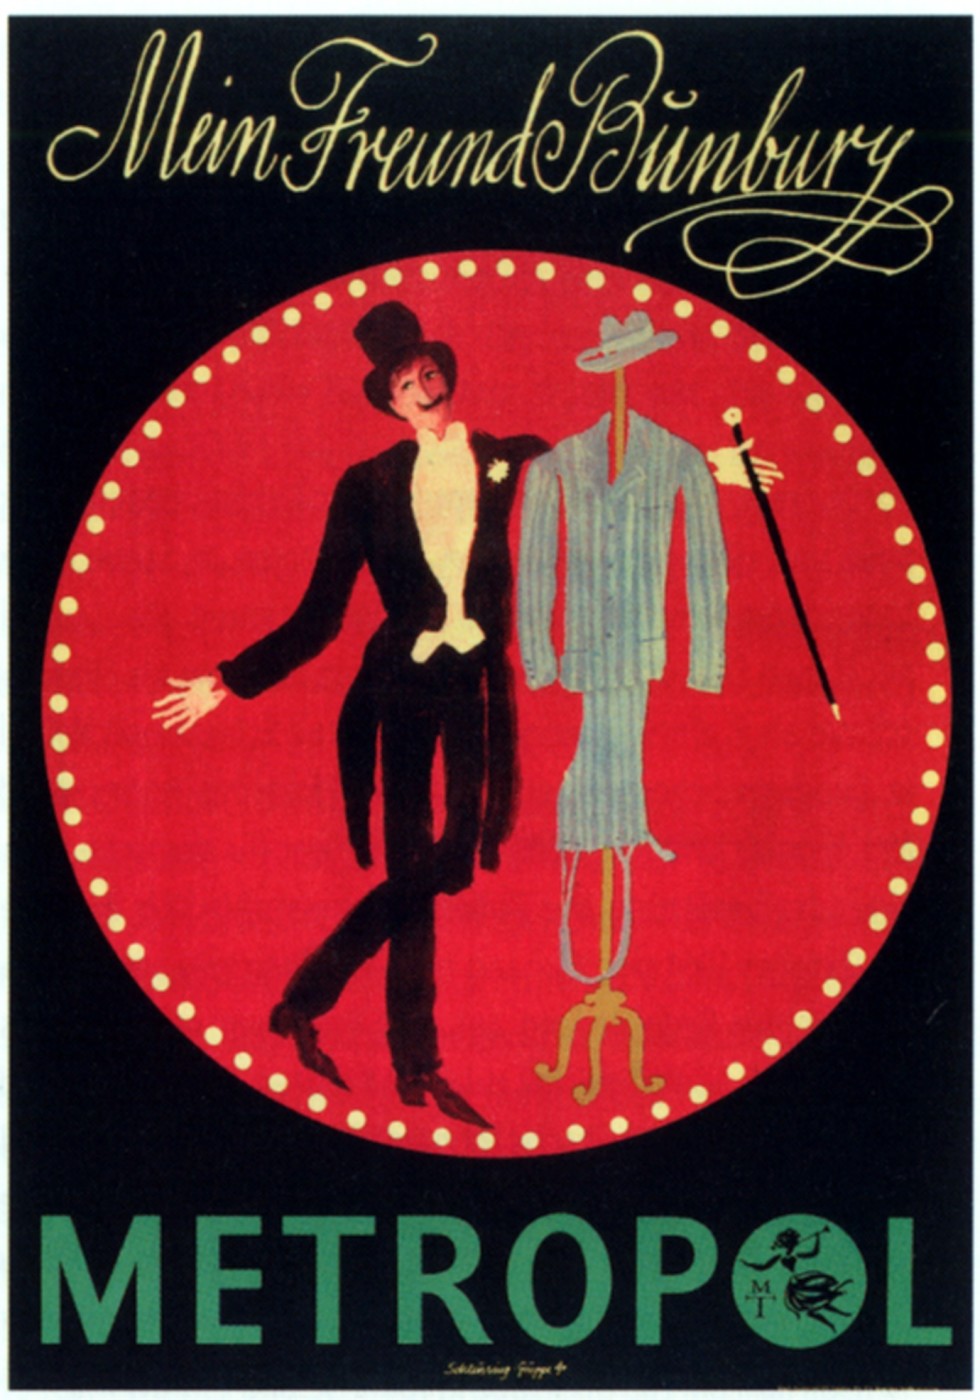 Poster for "Mein Freund Bunbury" at the Metropol Theater in East-Berlin, 1973.